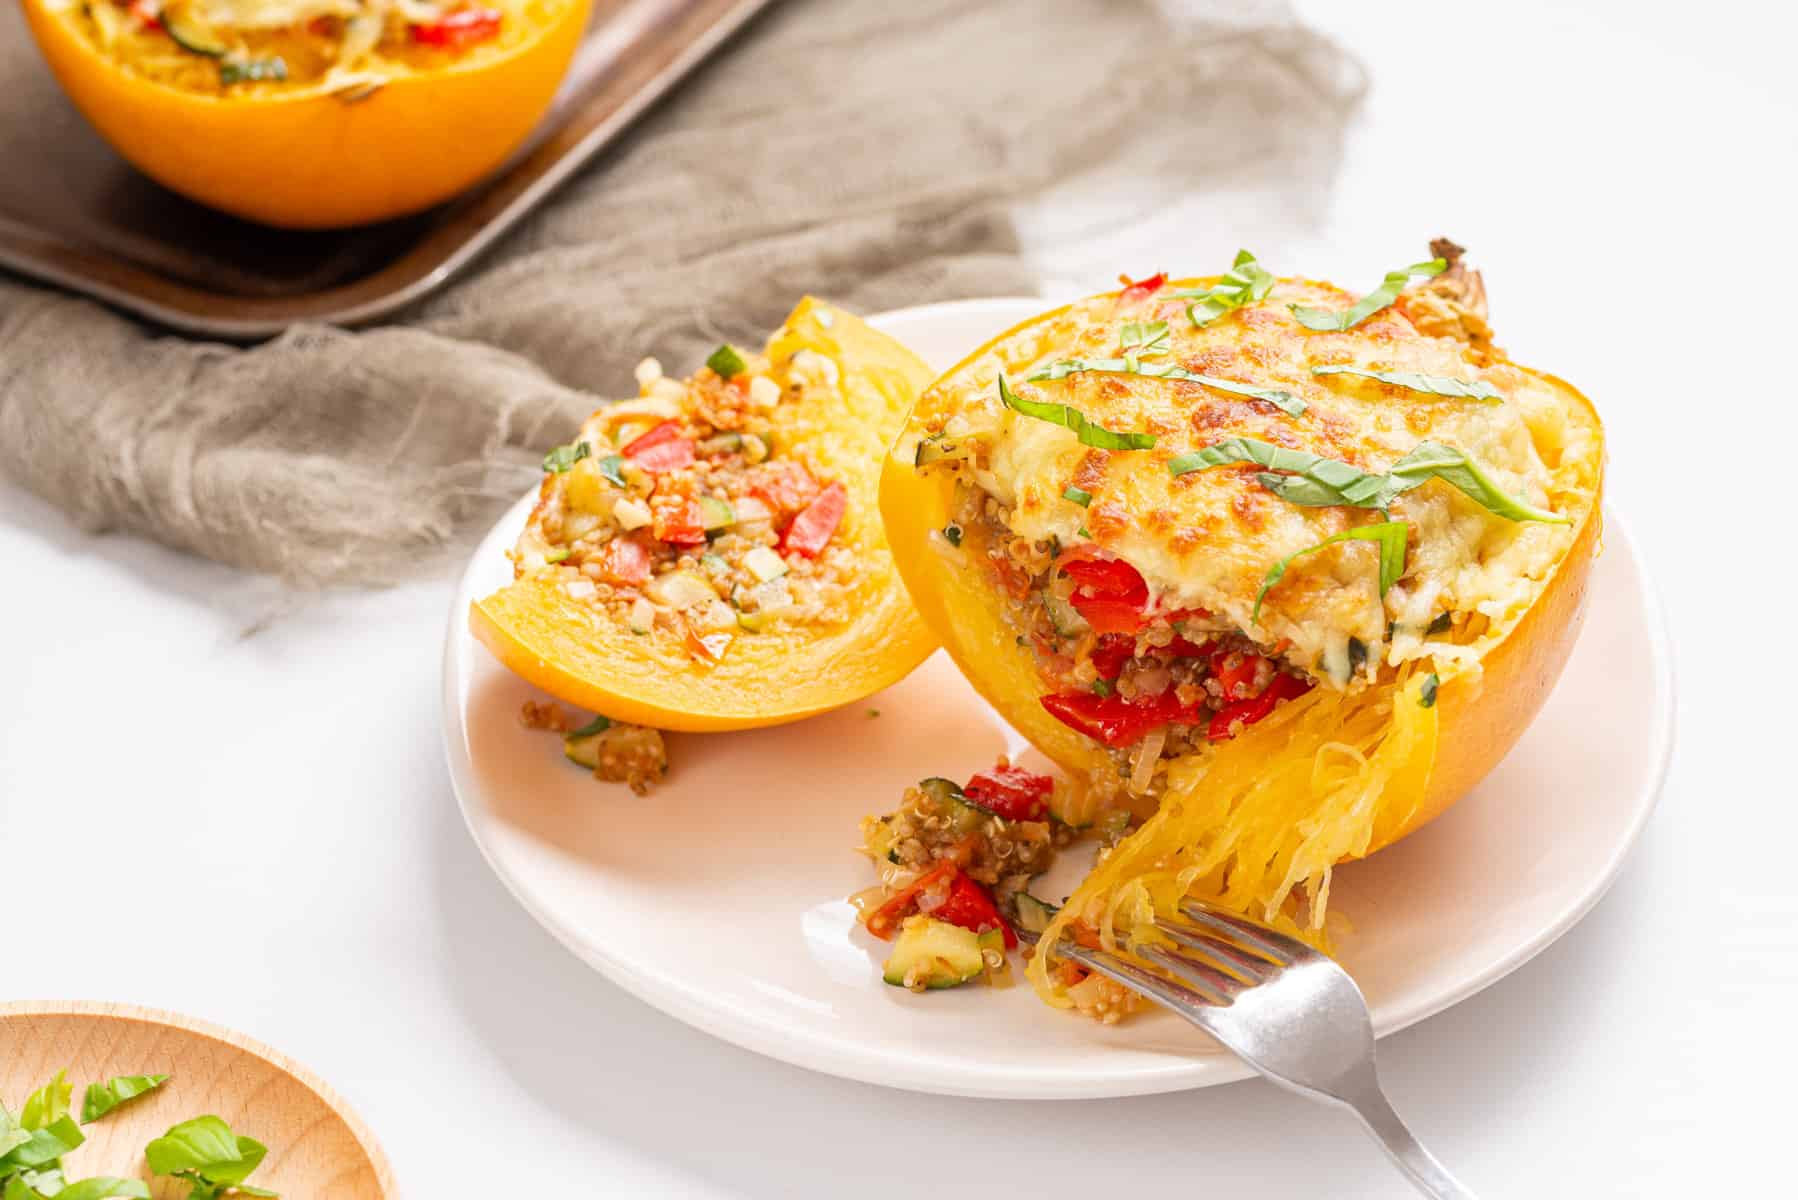 An image of two stuffed spaghetti squashes on a white plate with a fork  slicing a part of one of the squashes.